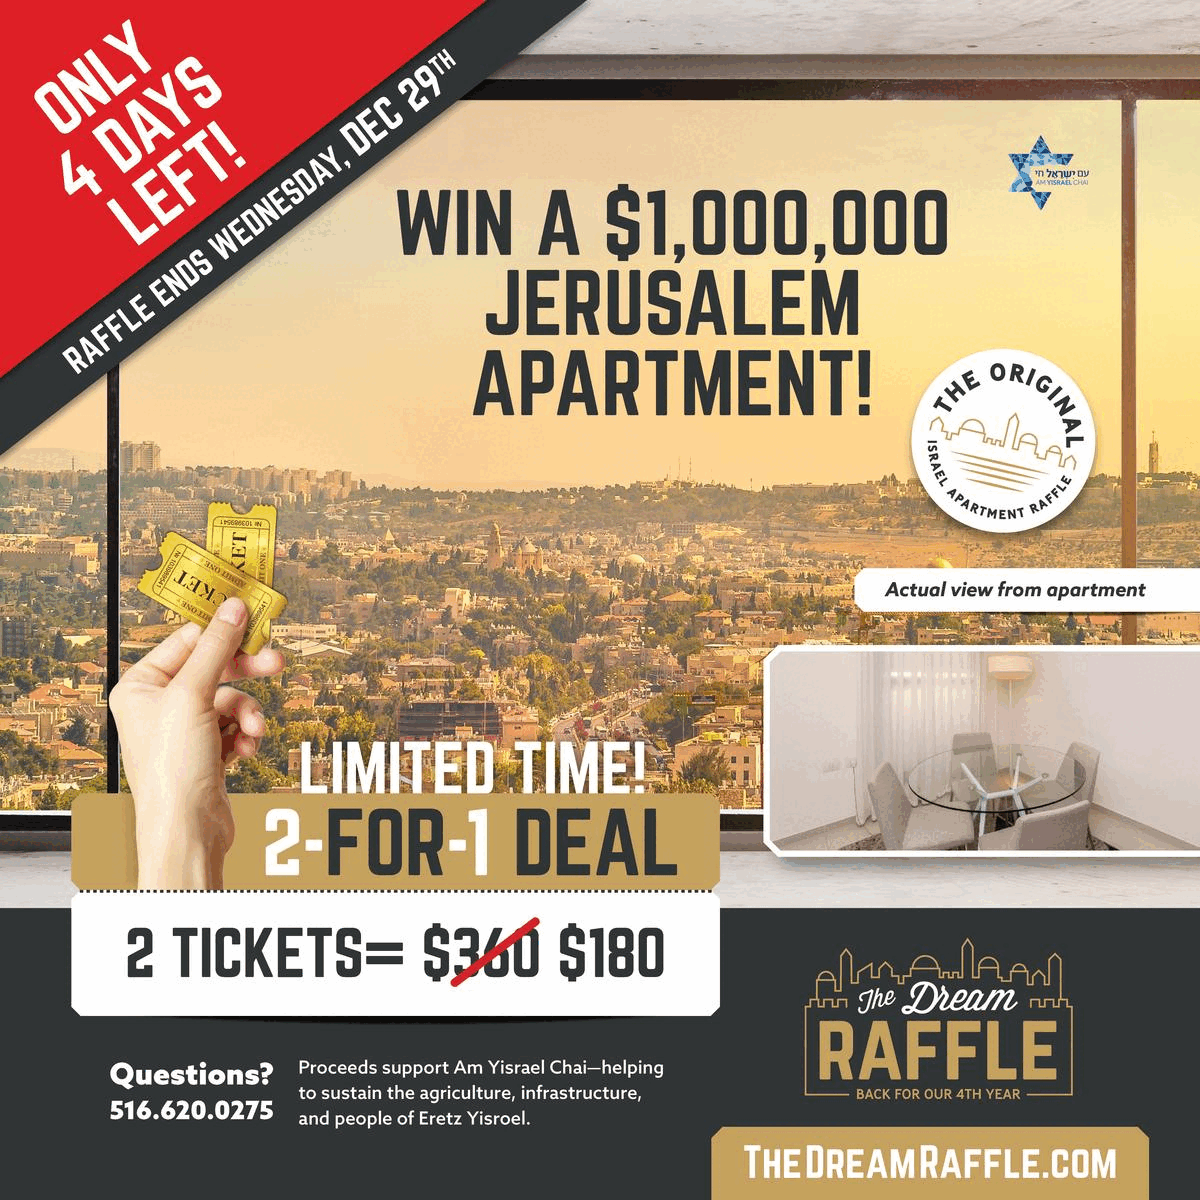 ONLY FOUR DAYS LEFT TO WIN A 1,000,000 JERUSALEM APARTMENT 2 for 1